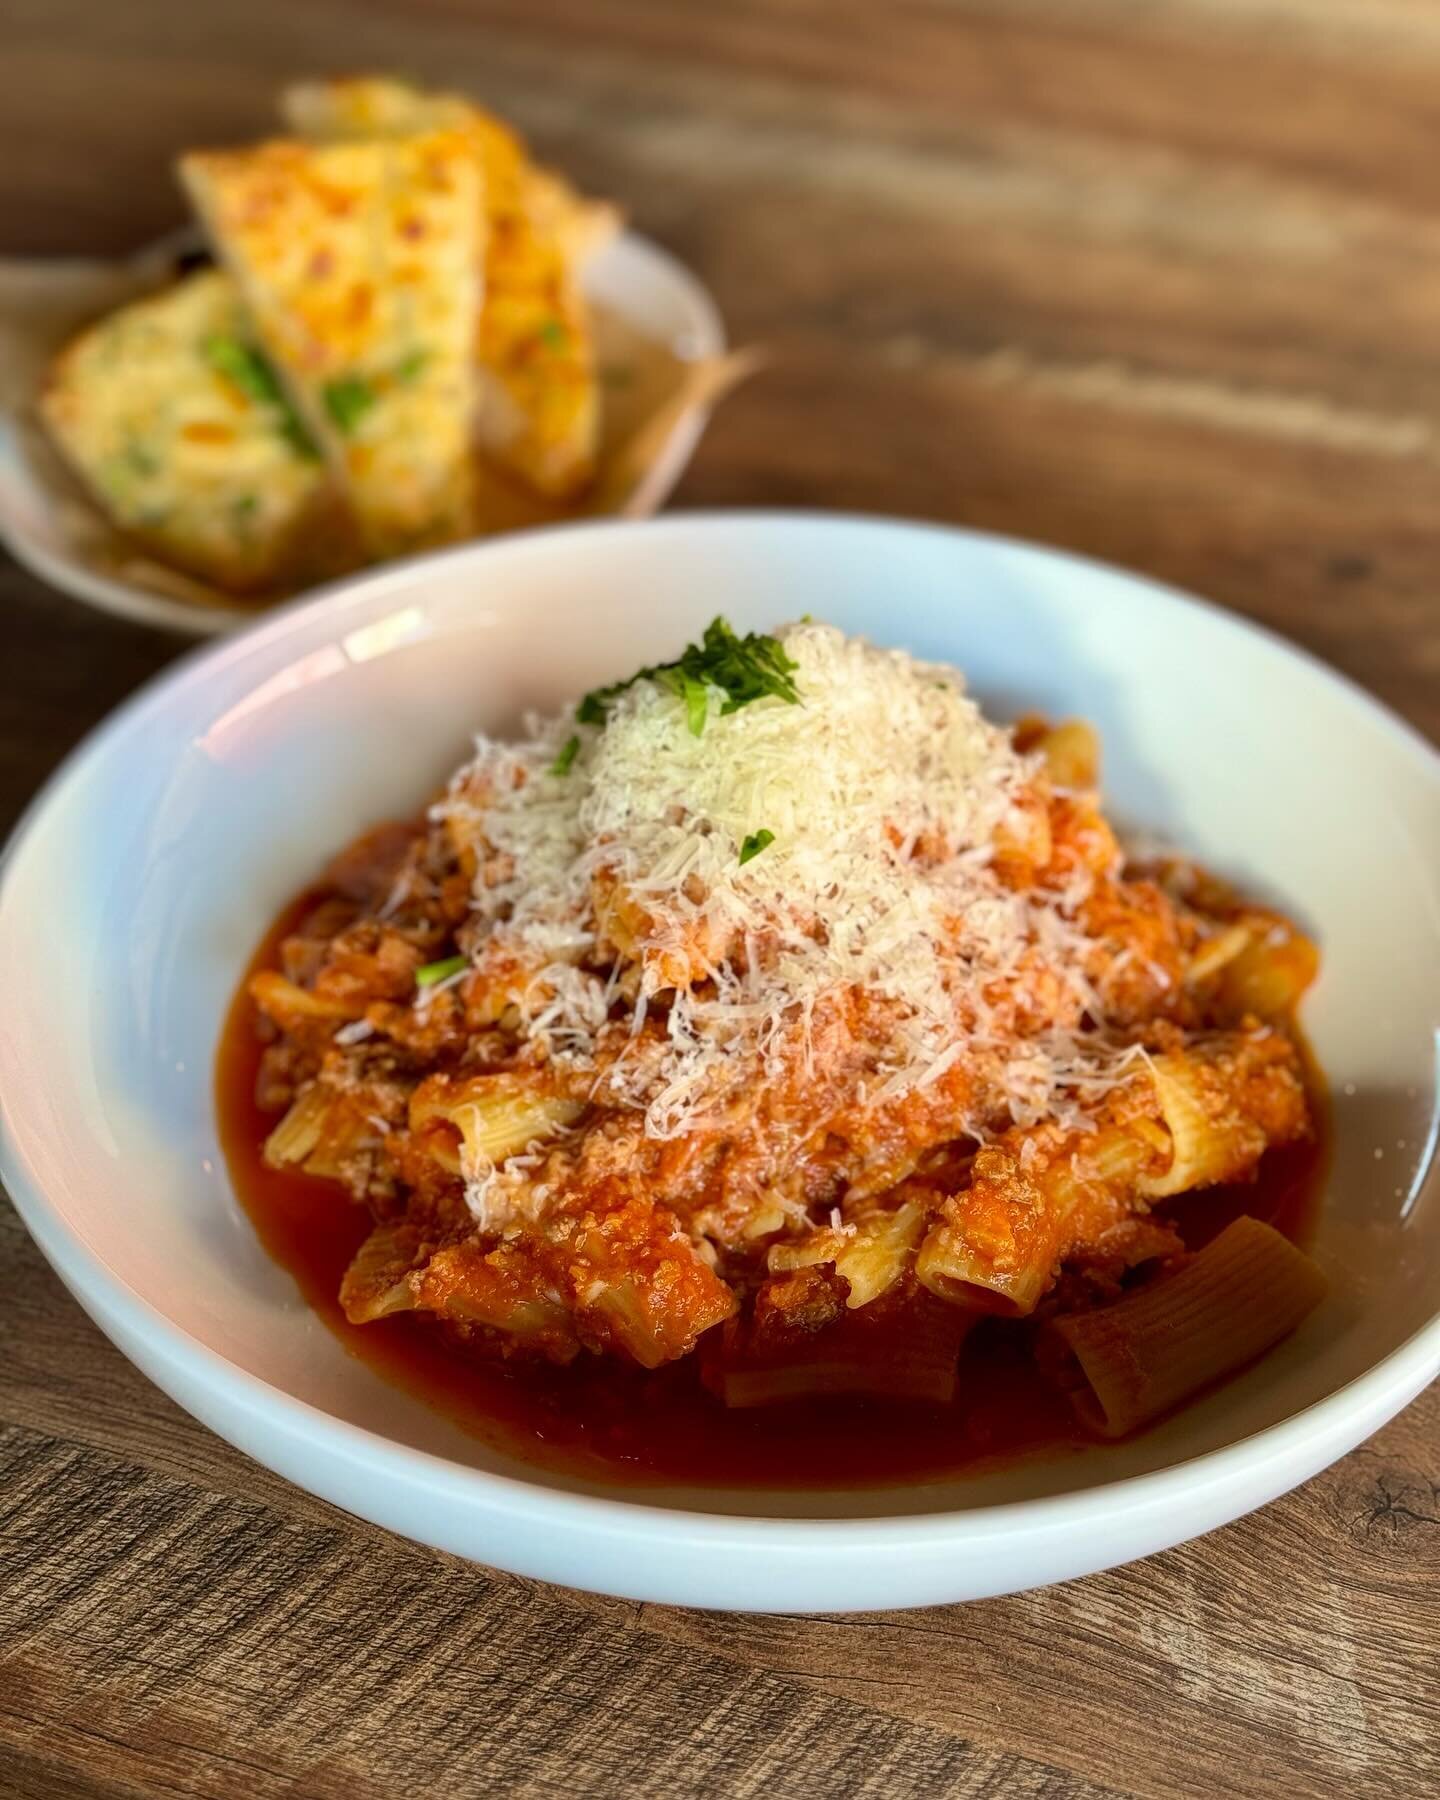 We&rsquo;ve got just what you need to keep warm this weekend! Rigatoni Bolognese served with Garlic Toast! See you soon! 

#rigatonibolognese #lakehighlands #dallasdining #lheats #whiterocklake #winterweather #eastdallas #warmupwithus